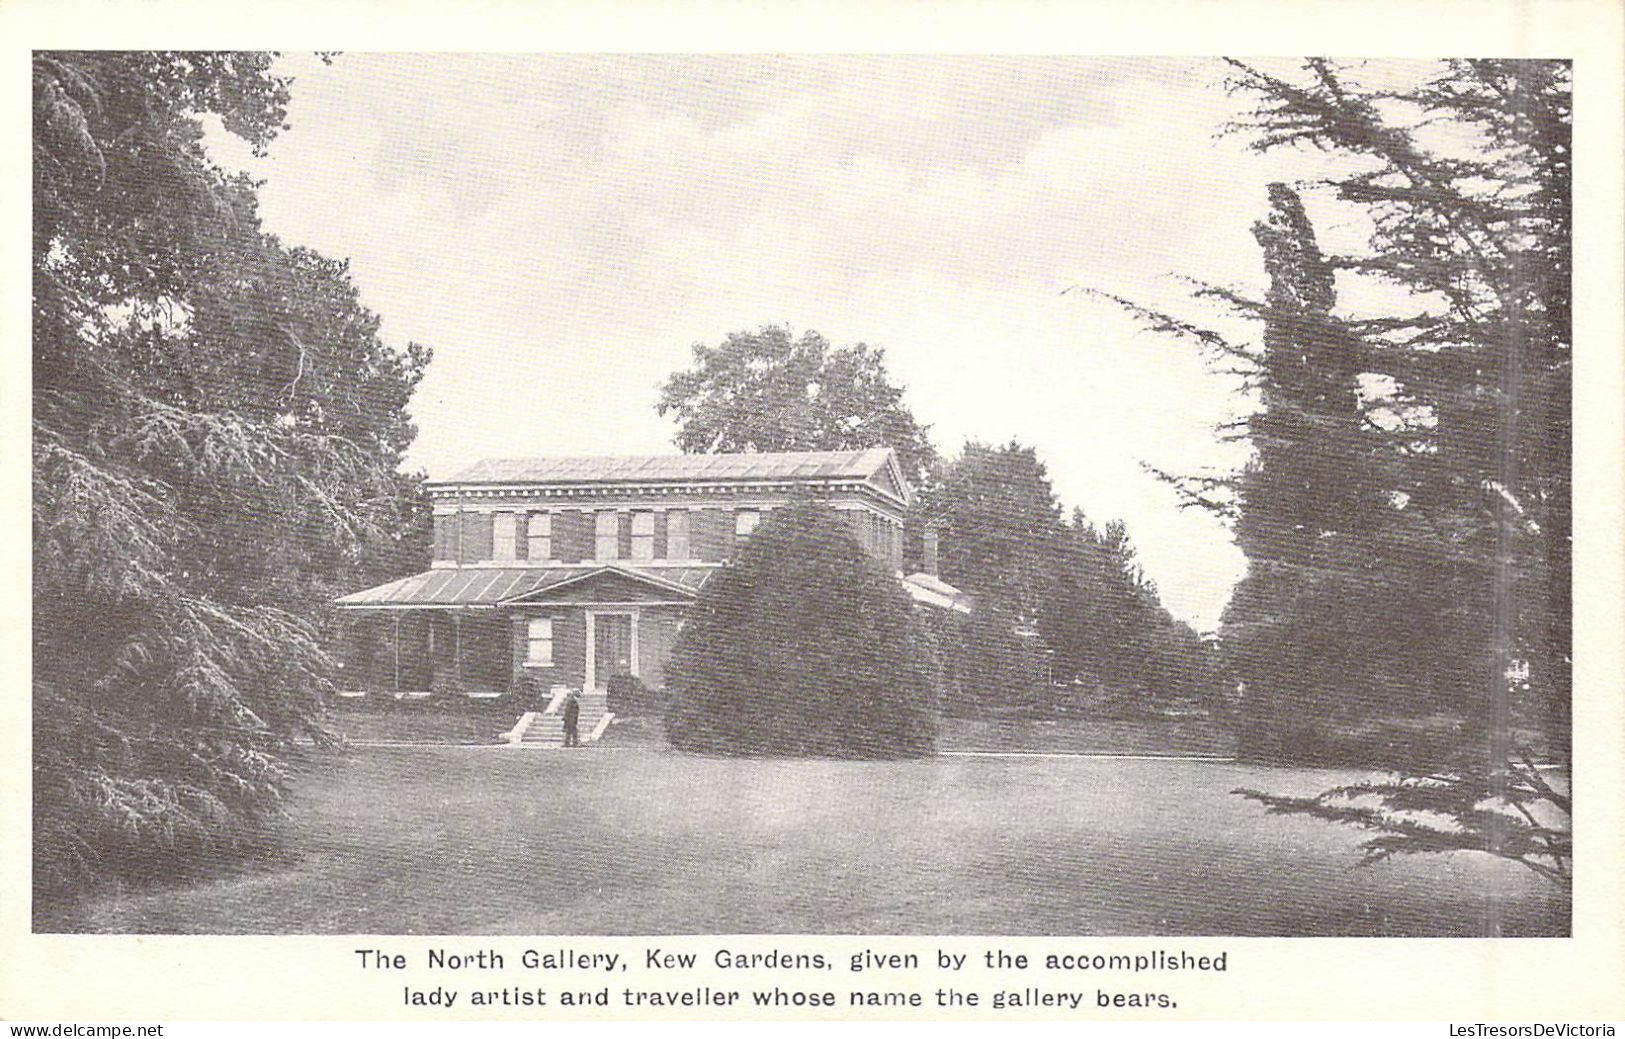 ROYAUME-UNIS - Angleterre - The North Gallery - Kew Gardens - Carte Postale Ancienne - Norvège